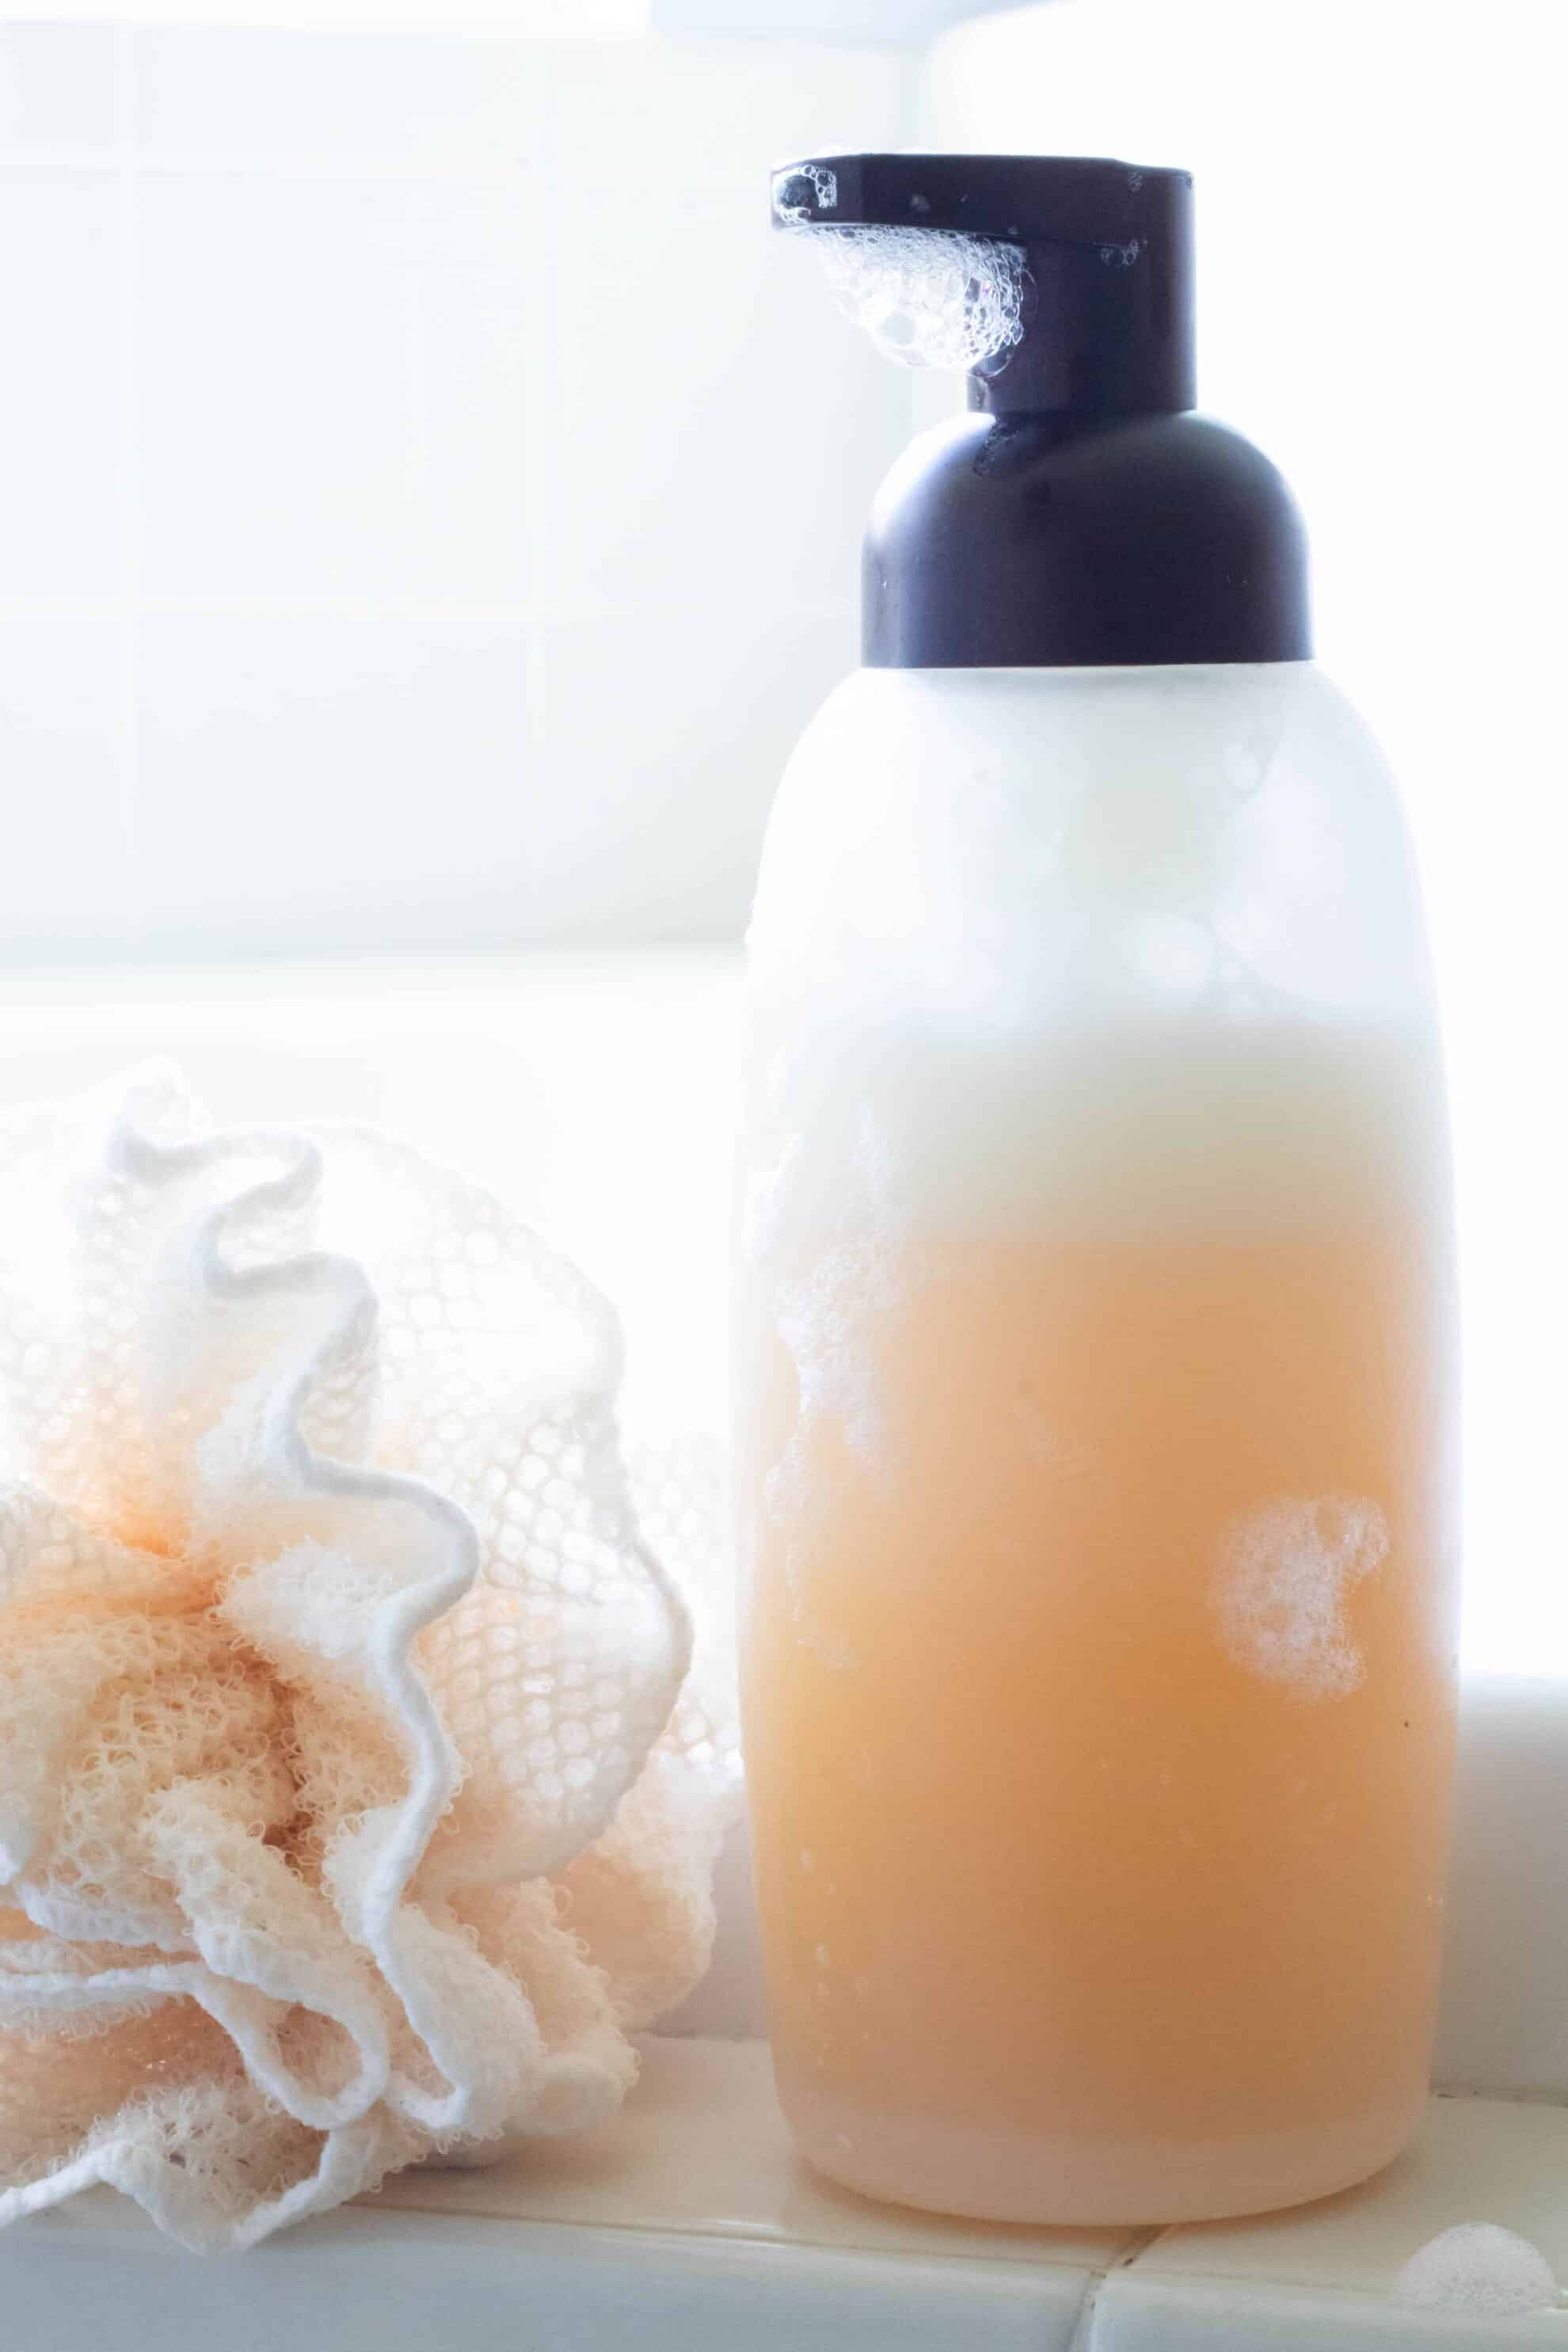 Shower scrubber and homemade healthy body wash.